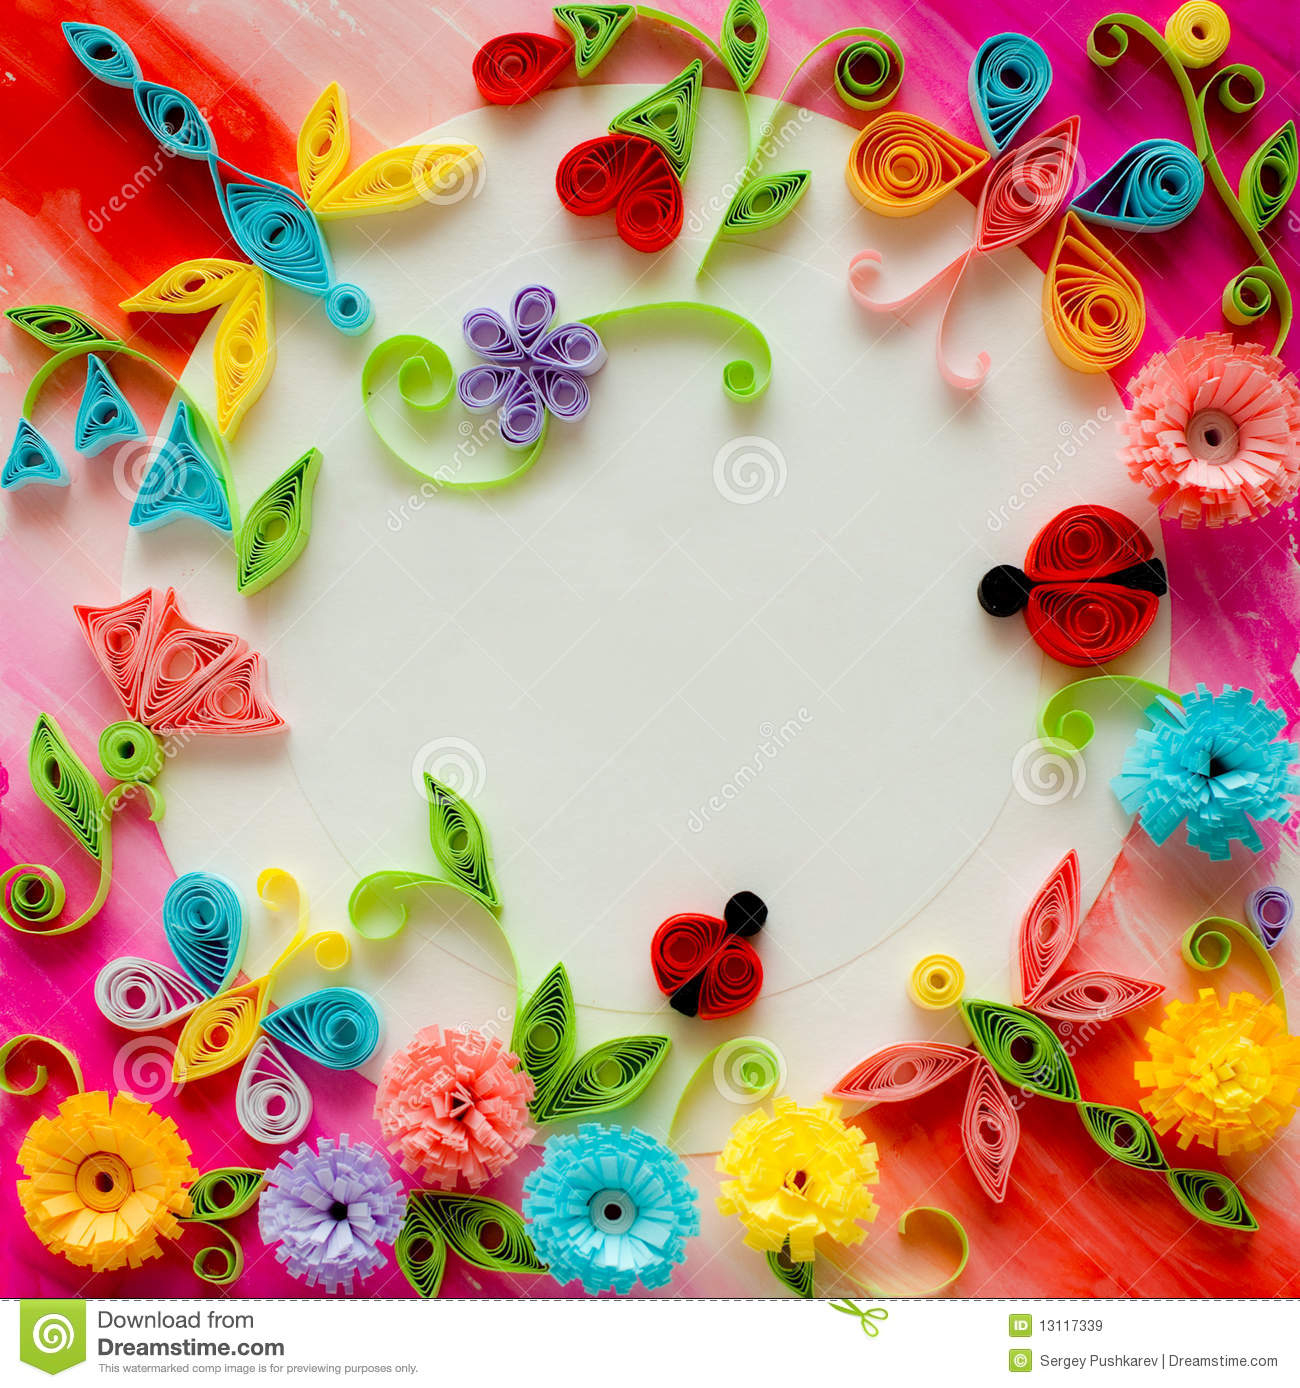 Quilling Birthday Cards Ideas 010 Template Ideas Quilling Greeting Card Blank Unforgettable